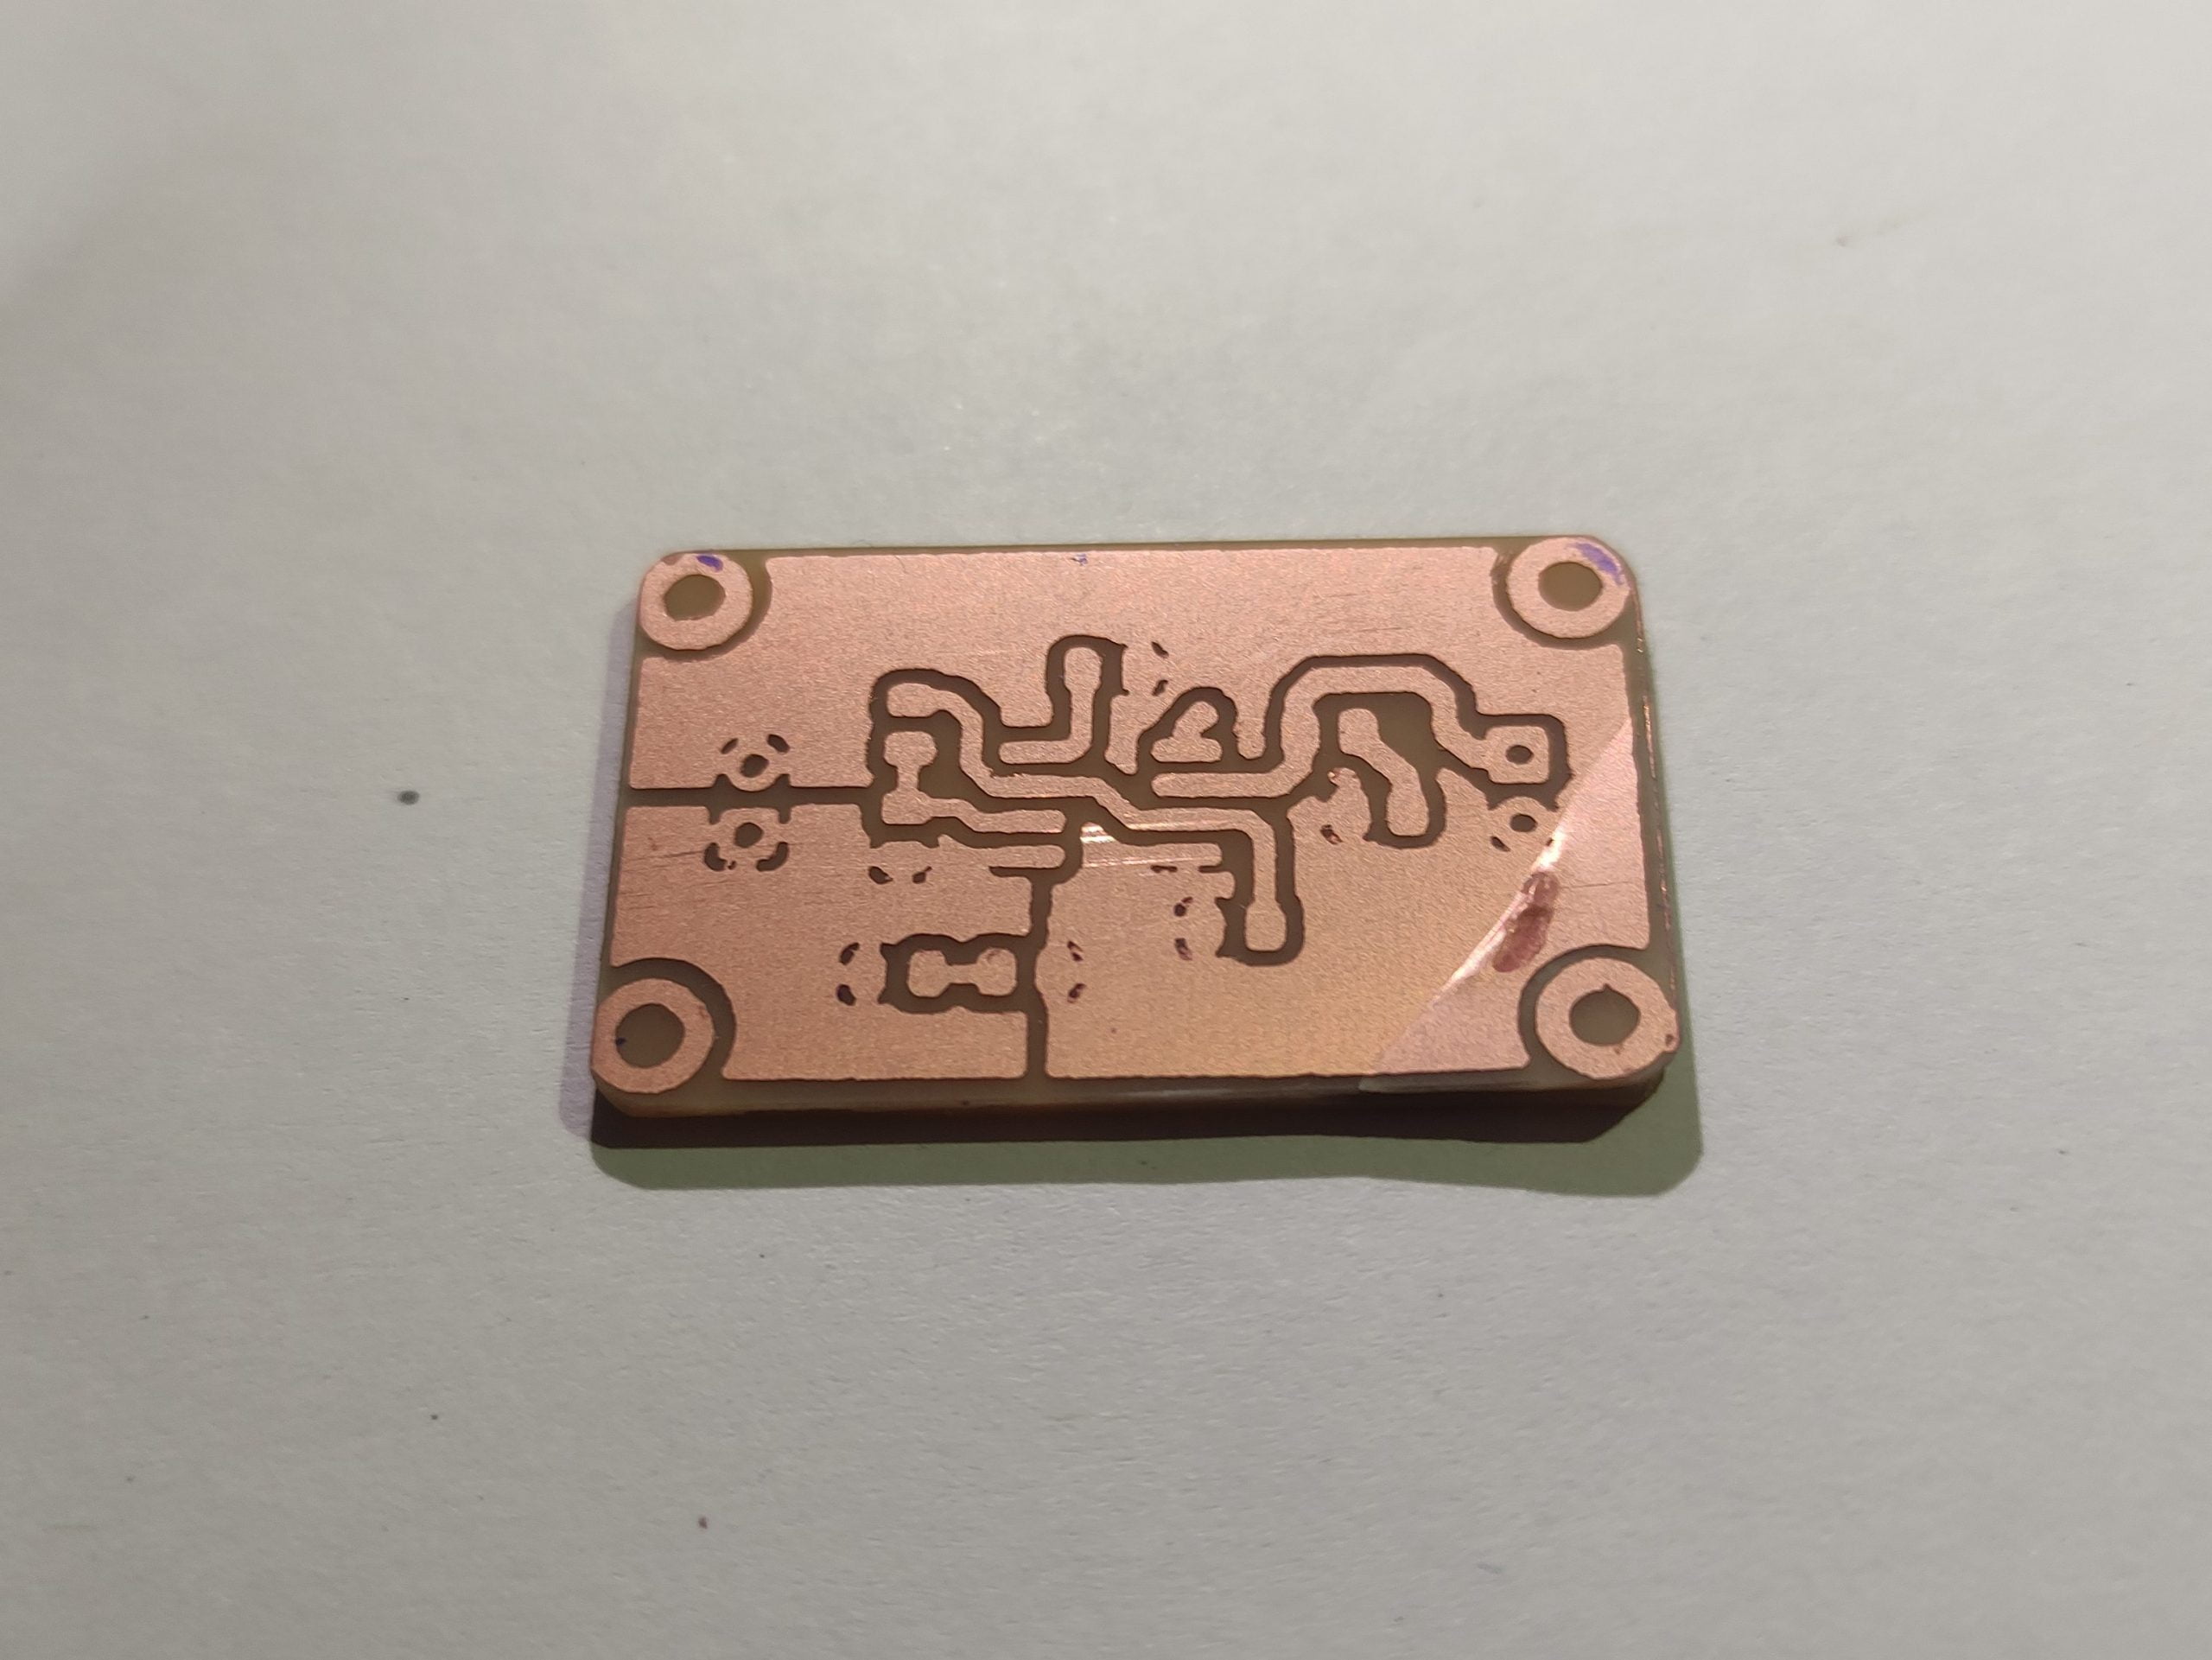 How to Make Your own PCB with Solder Mask